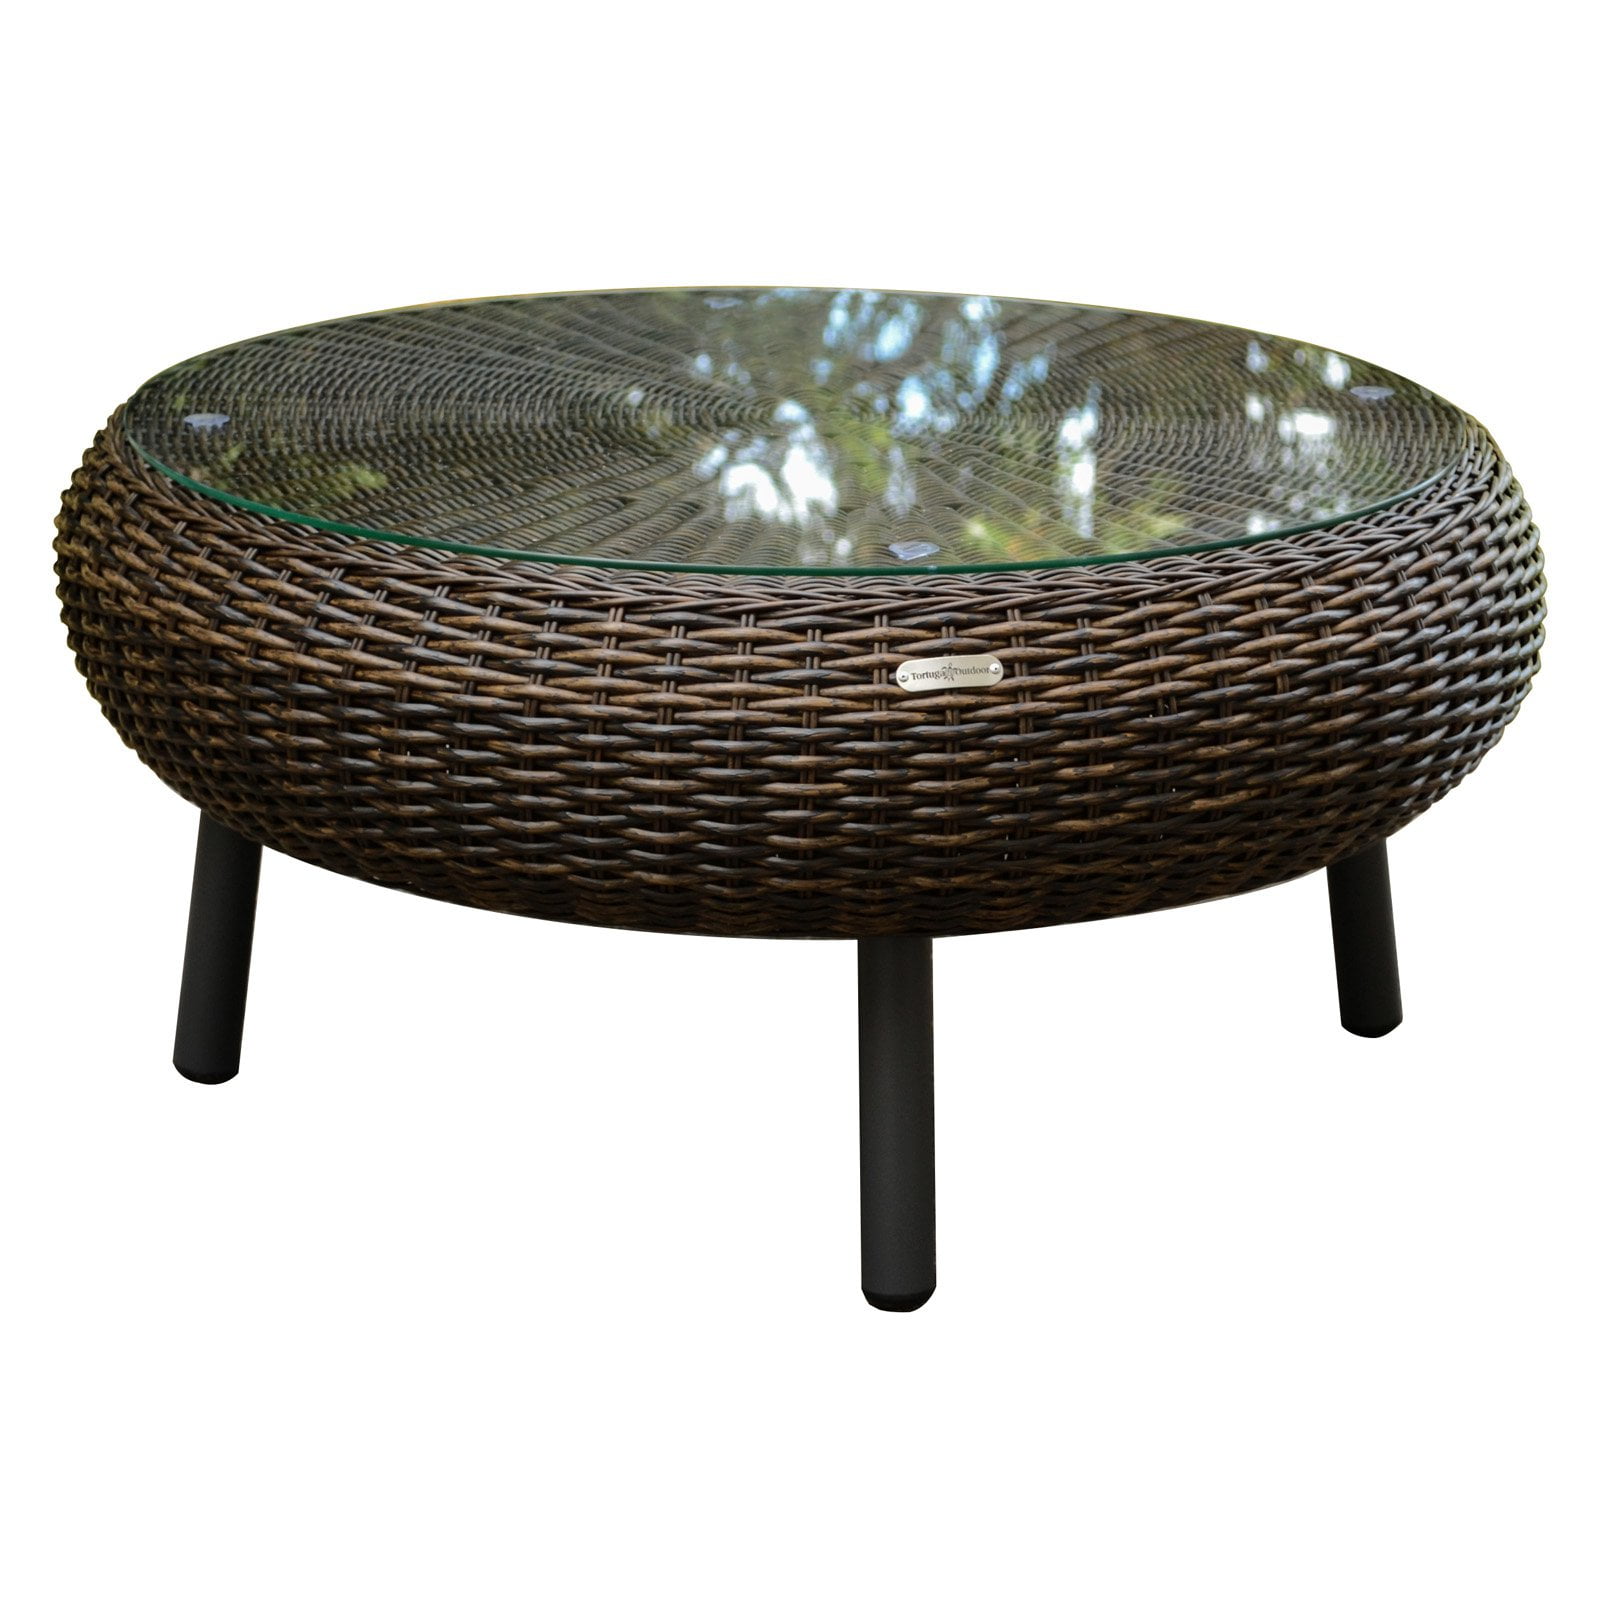 Tortuga Outdoor Round Wicker Table